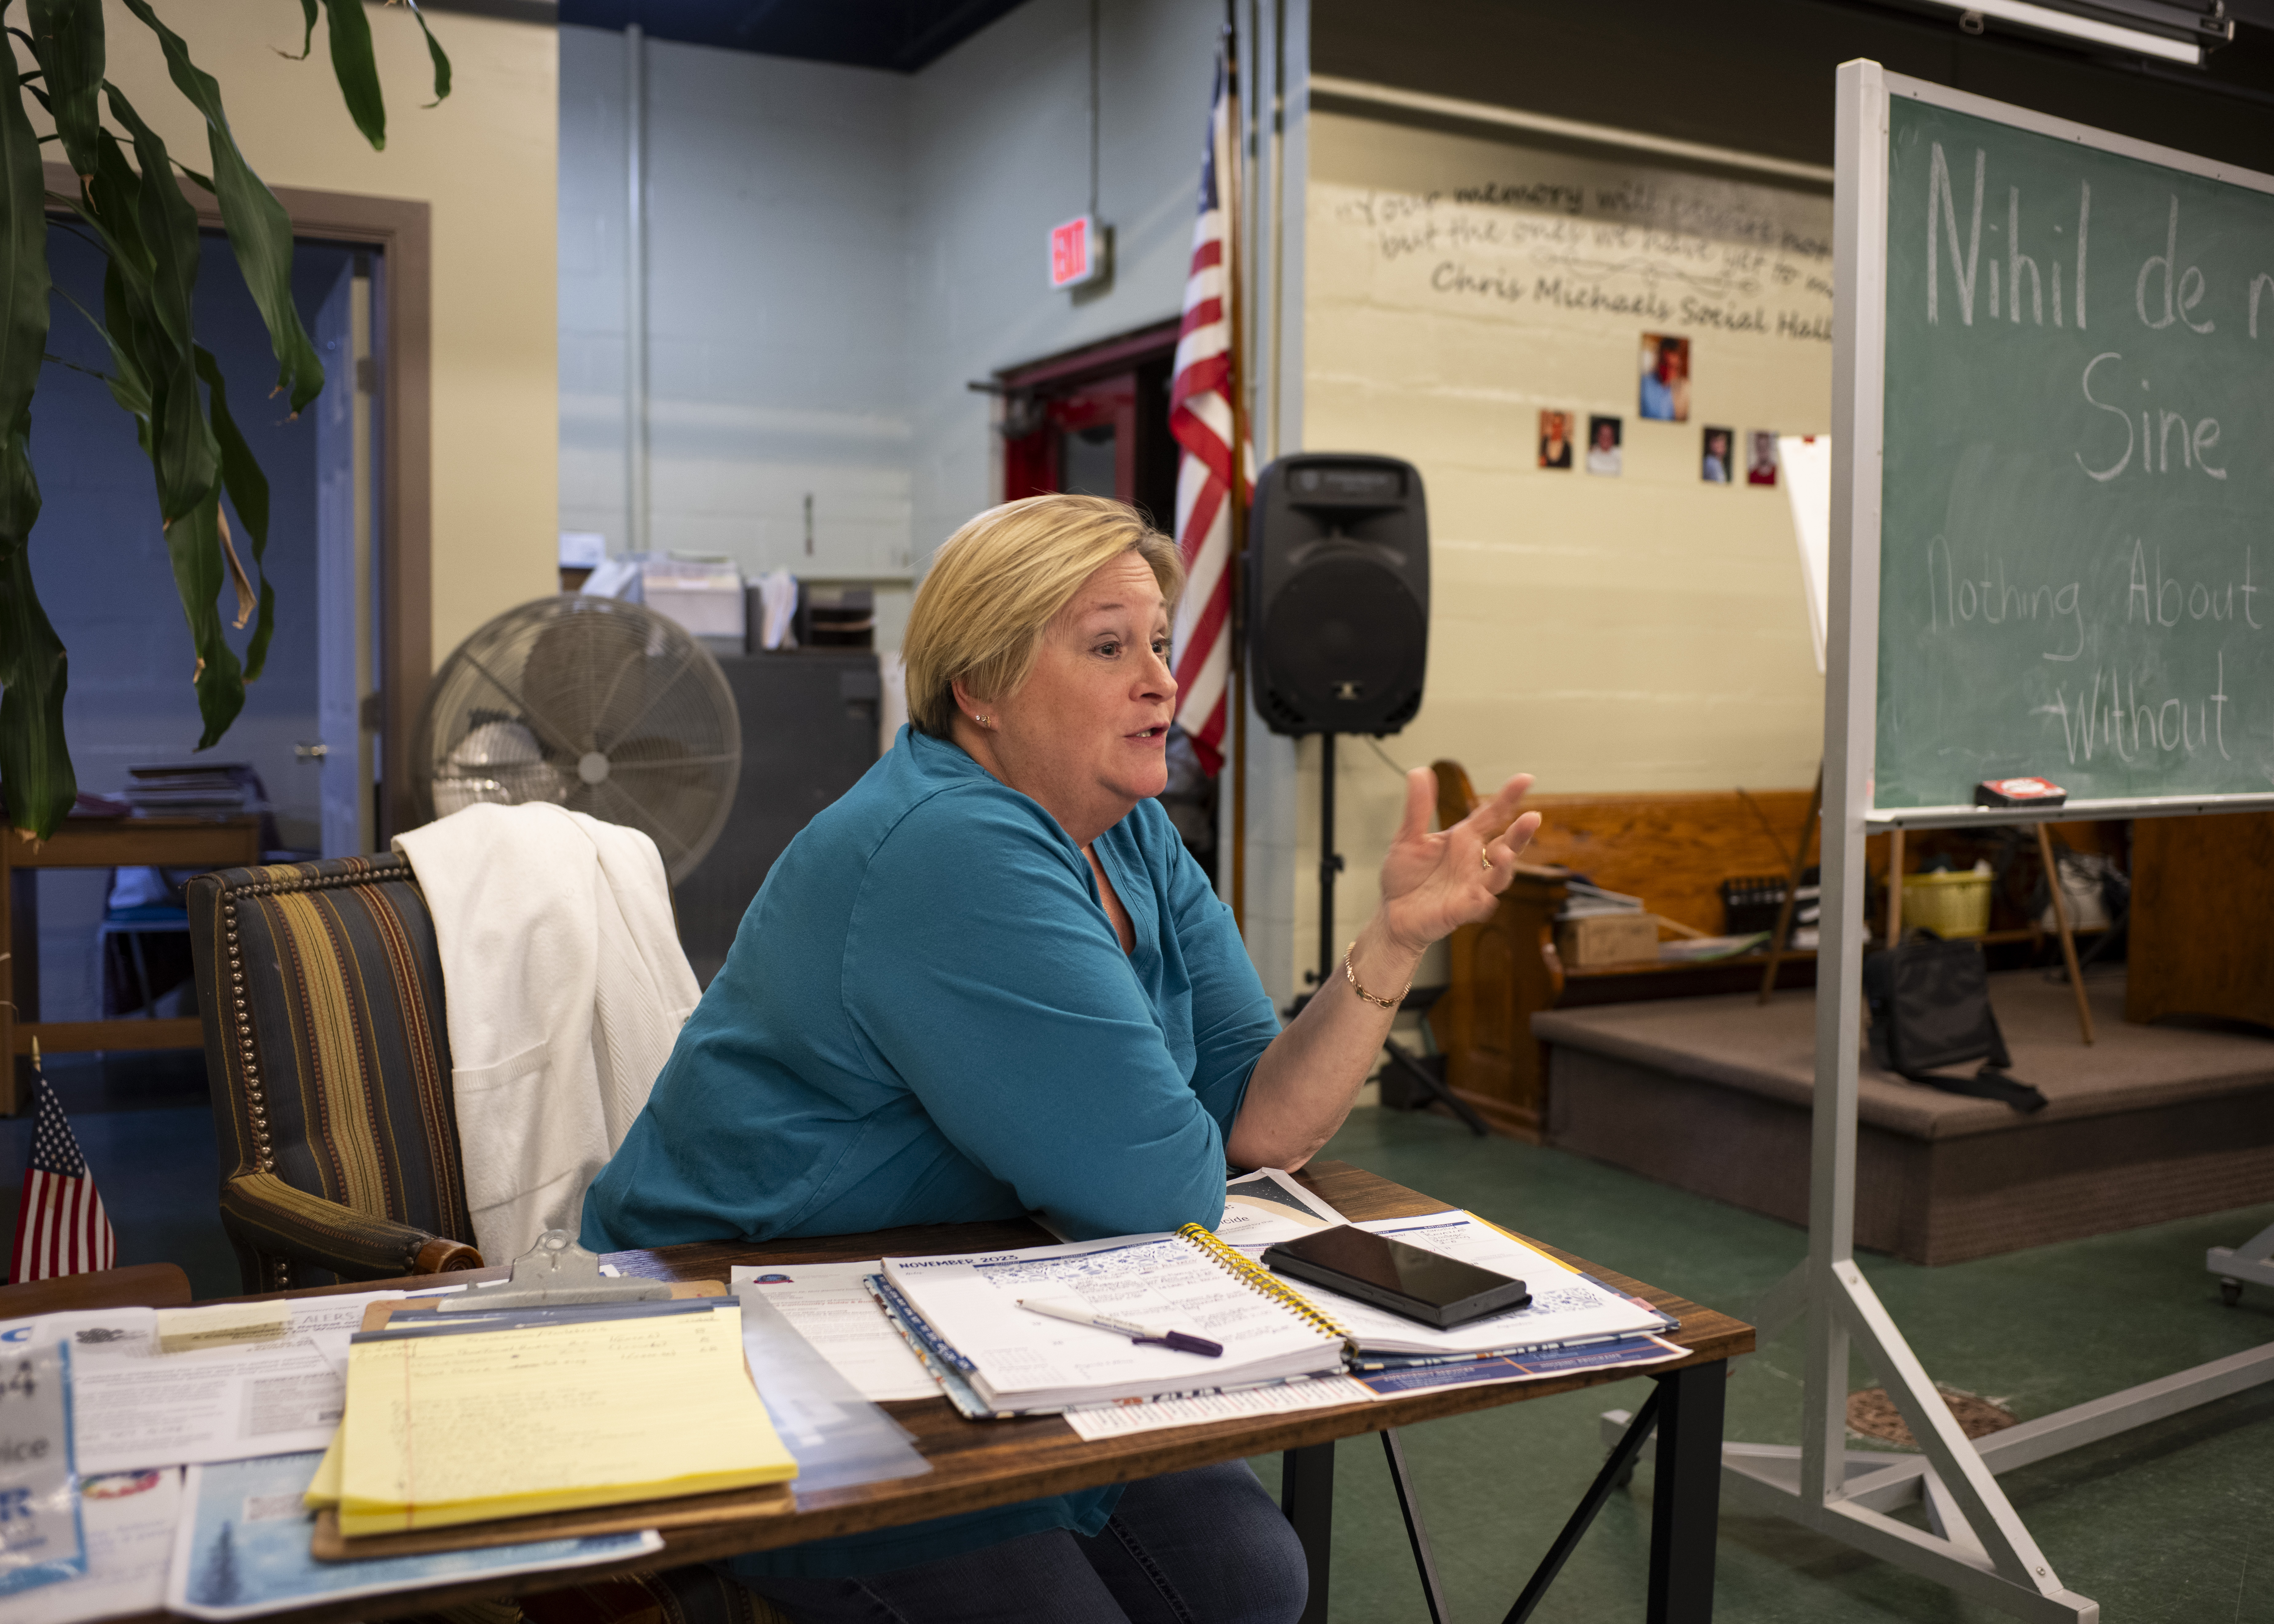 A woman in a blue shirt with blonde hair sits in a basement office, speaking with another person outside of the frame